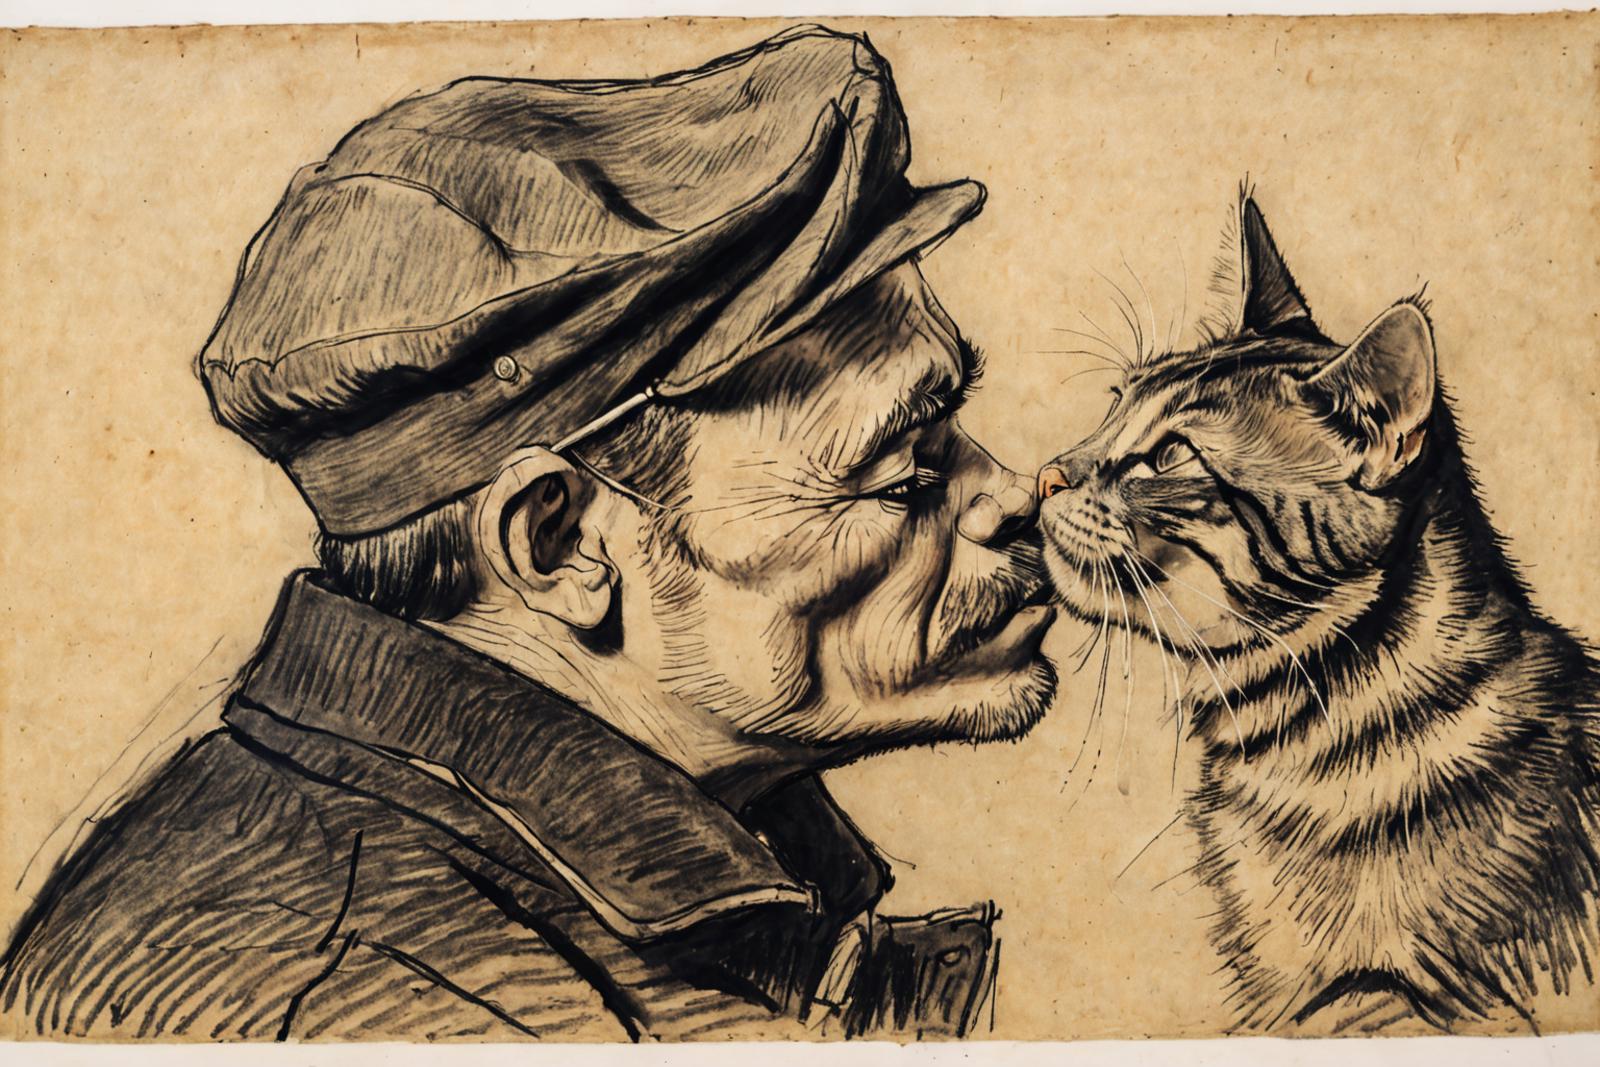 Man and Cat Kissing: A black and white drawing of a man with a hat and a cat sharing a tender moment.